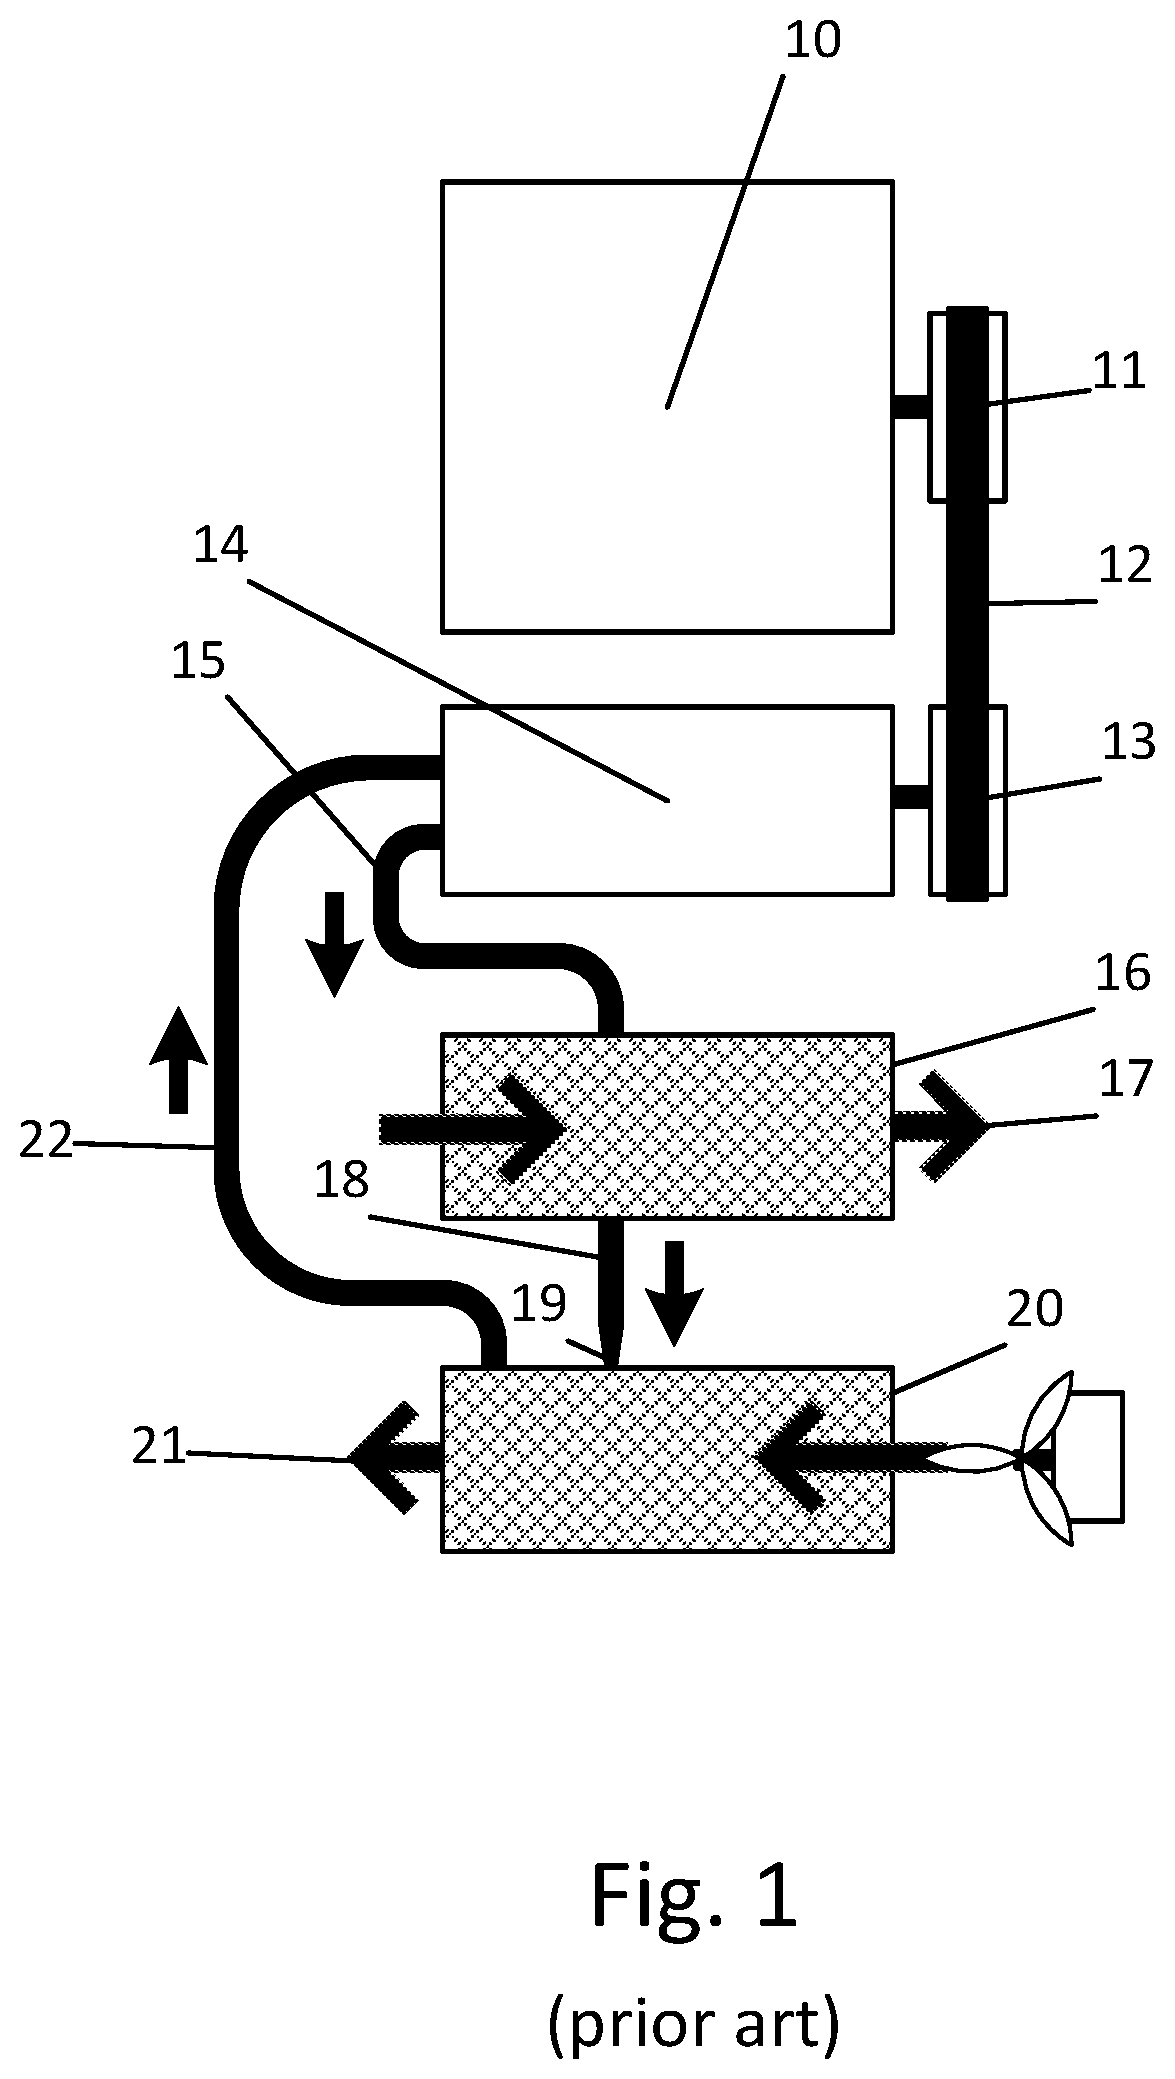 Auxiliary Air-Conditioning System for Over-the-Road Trucks